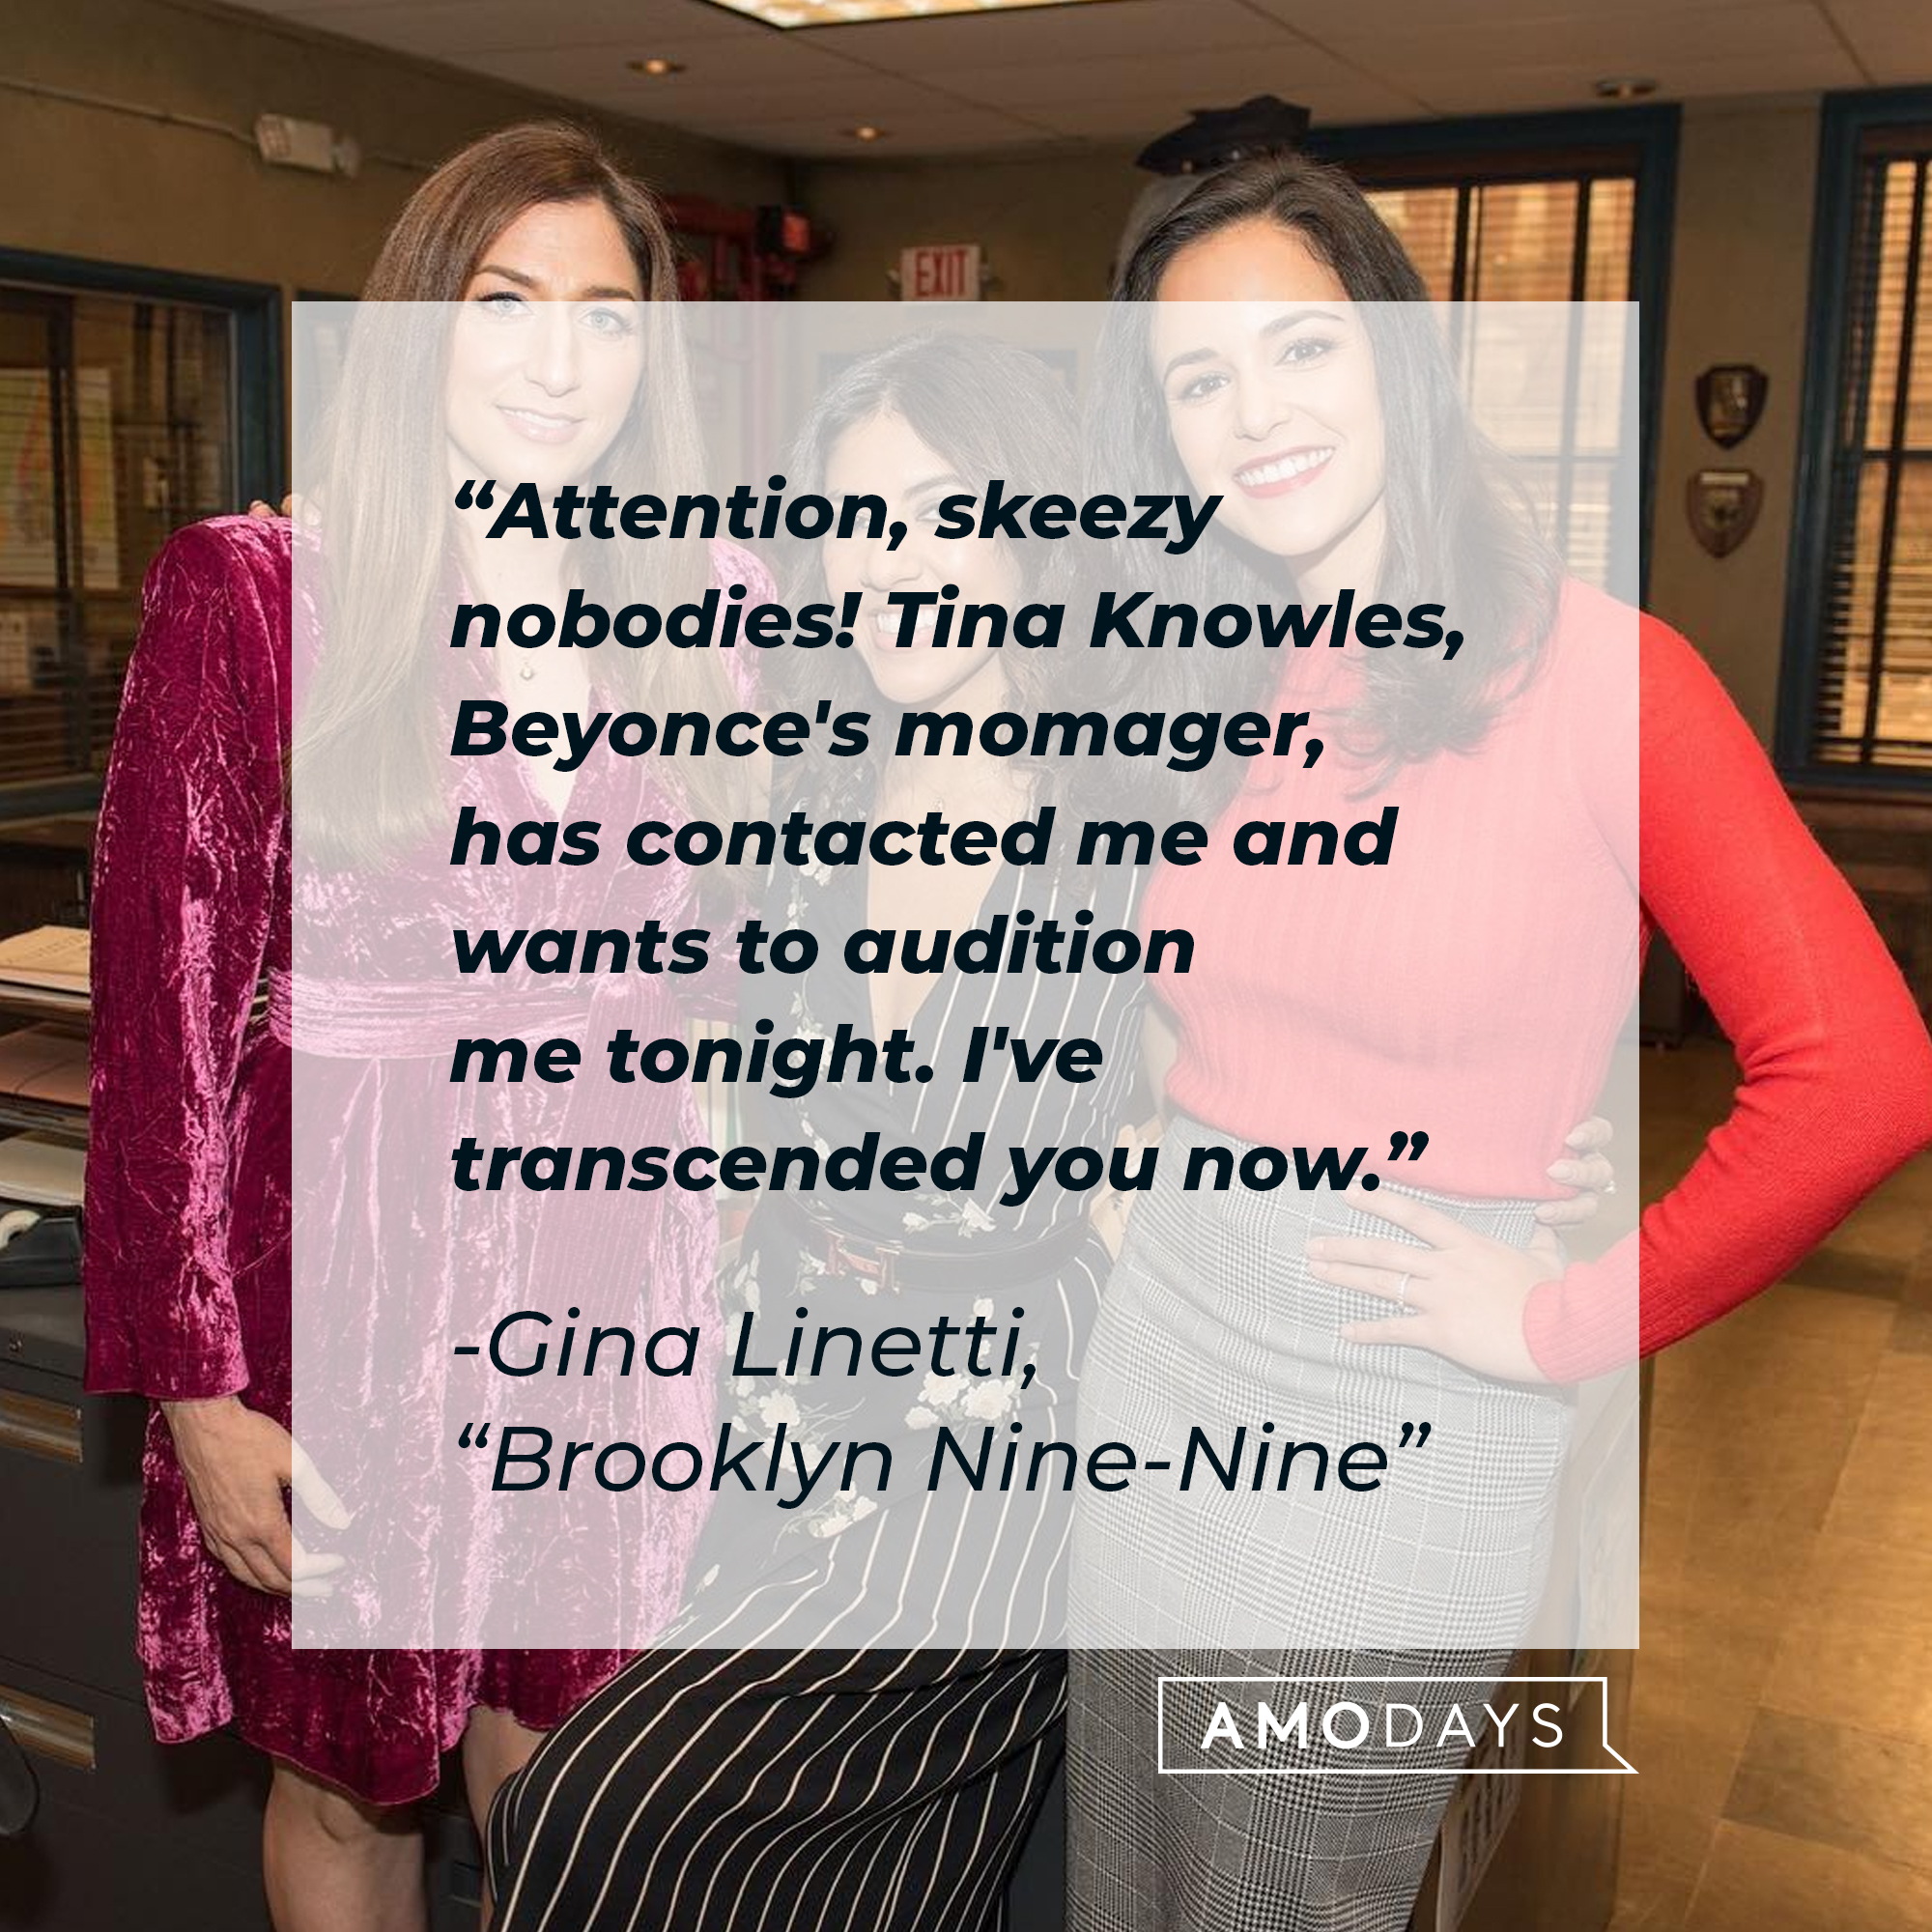 Gina Linetti with her quote: "Attention, skeezy nobodies! Tina Knowles, Beyonce's momager, has contacted me and wants to audition me tonight. I've transcended you now." | Source: Facebook.com/BrooklynNineNine